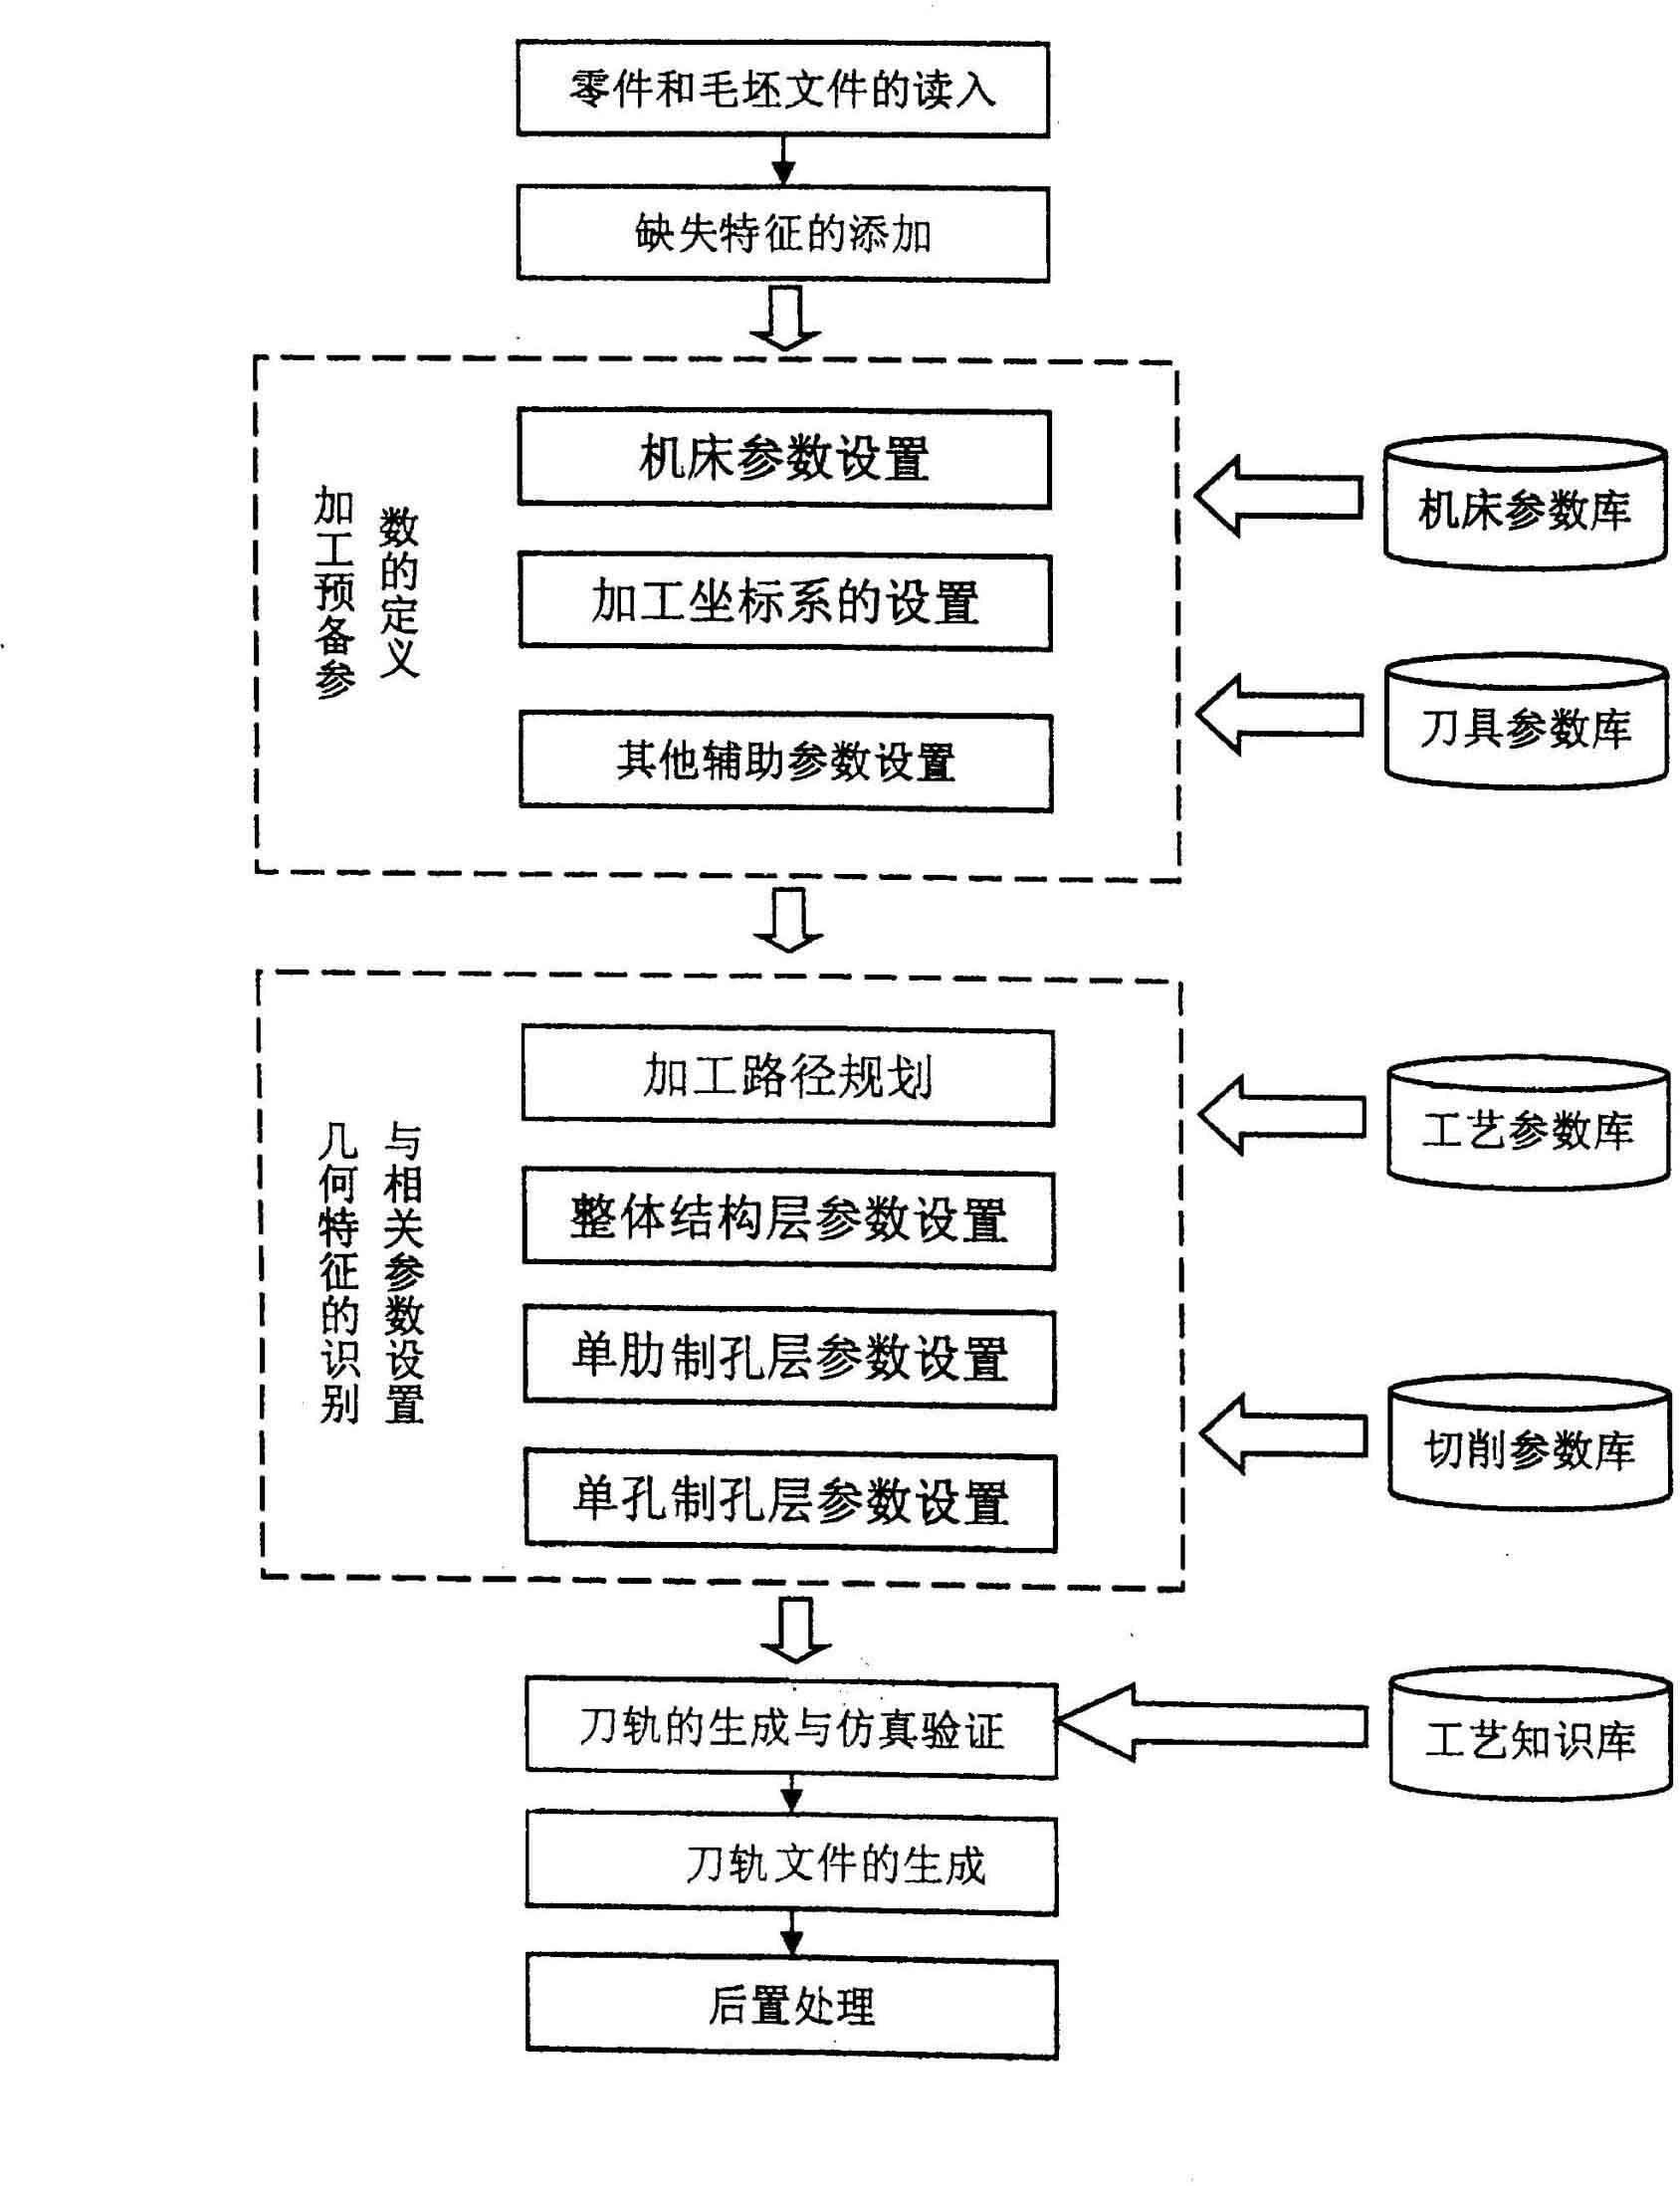 Multilayer numerical control programming method for flexible hole formation on large-scale wing part